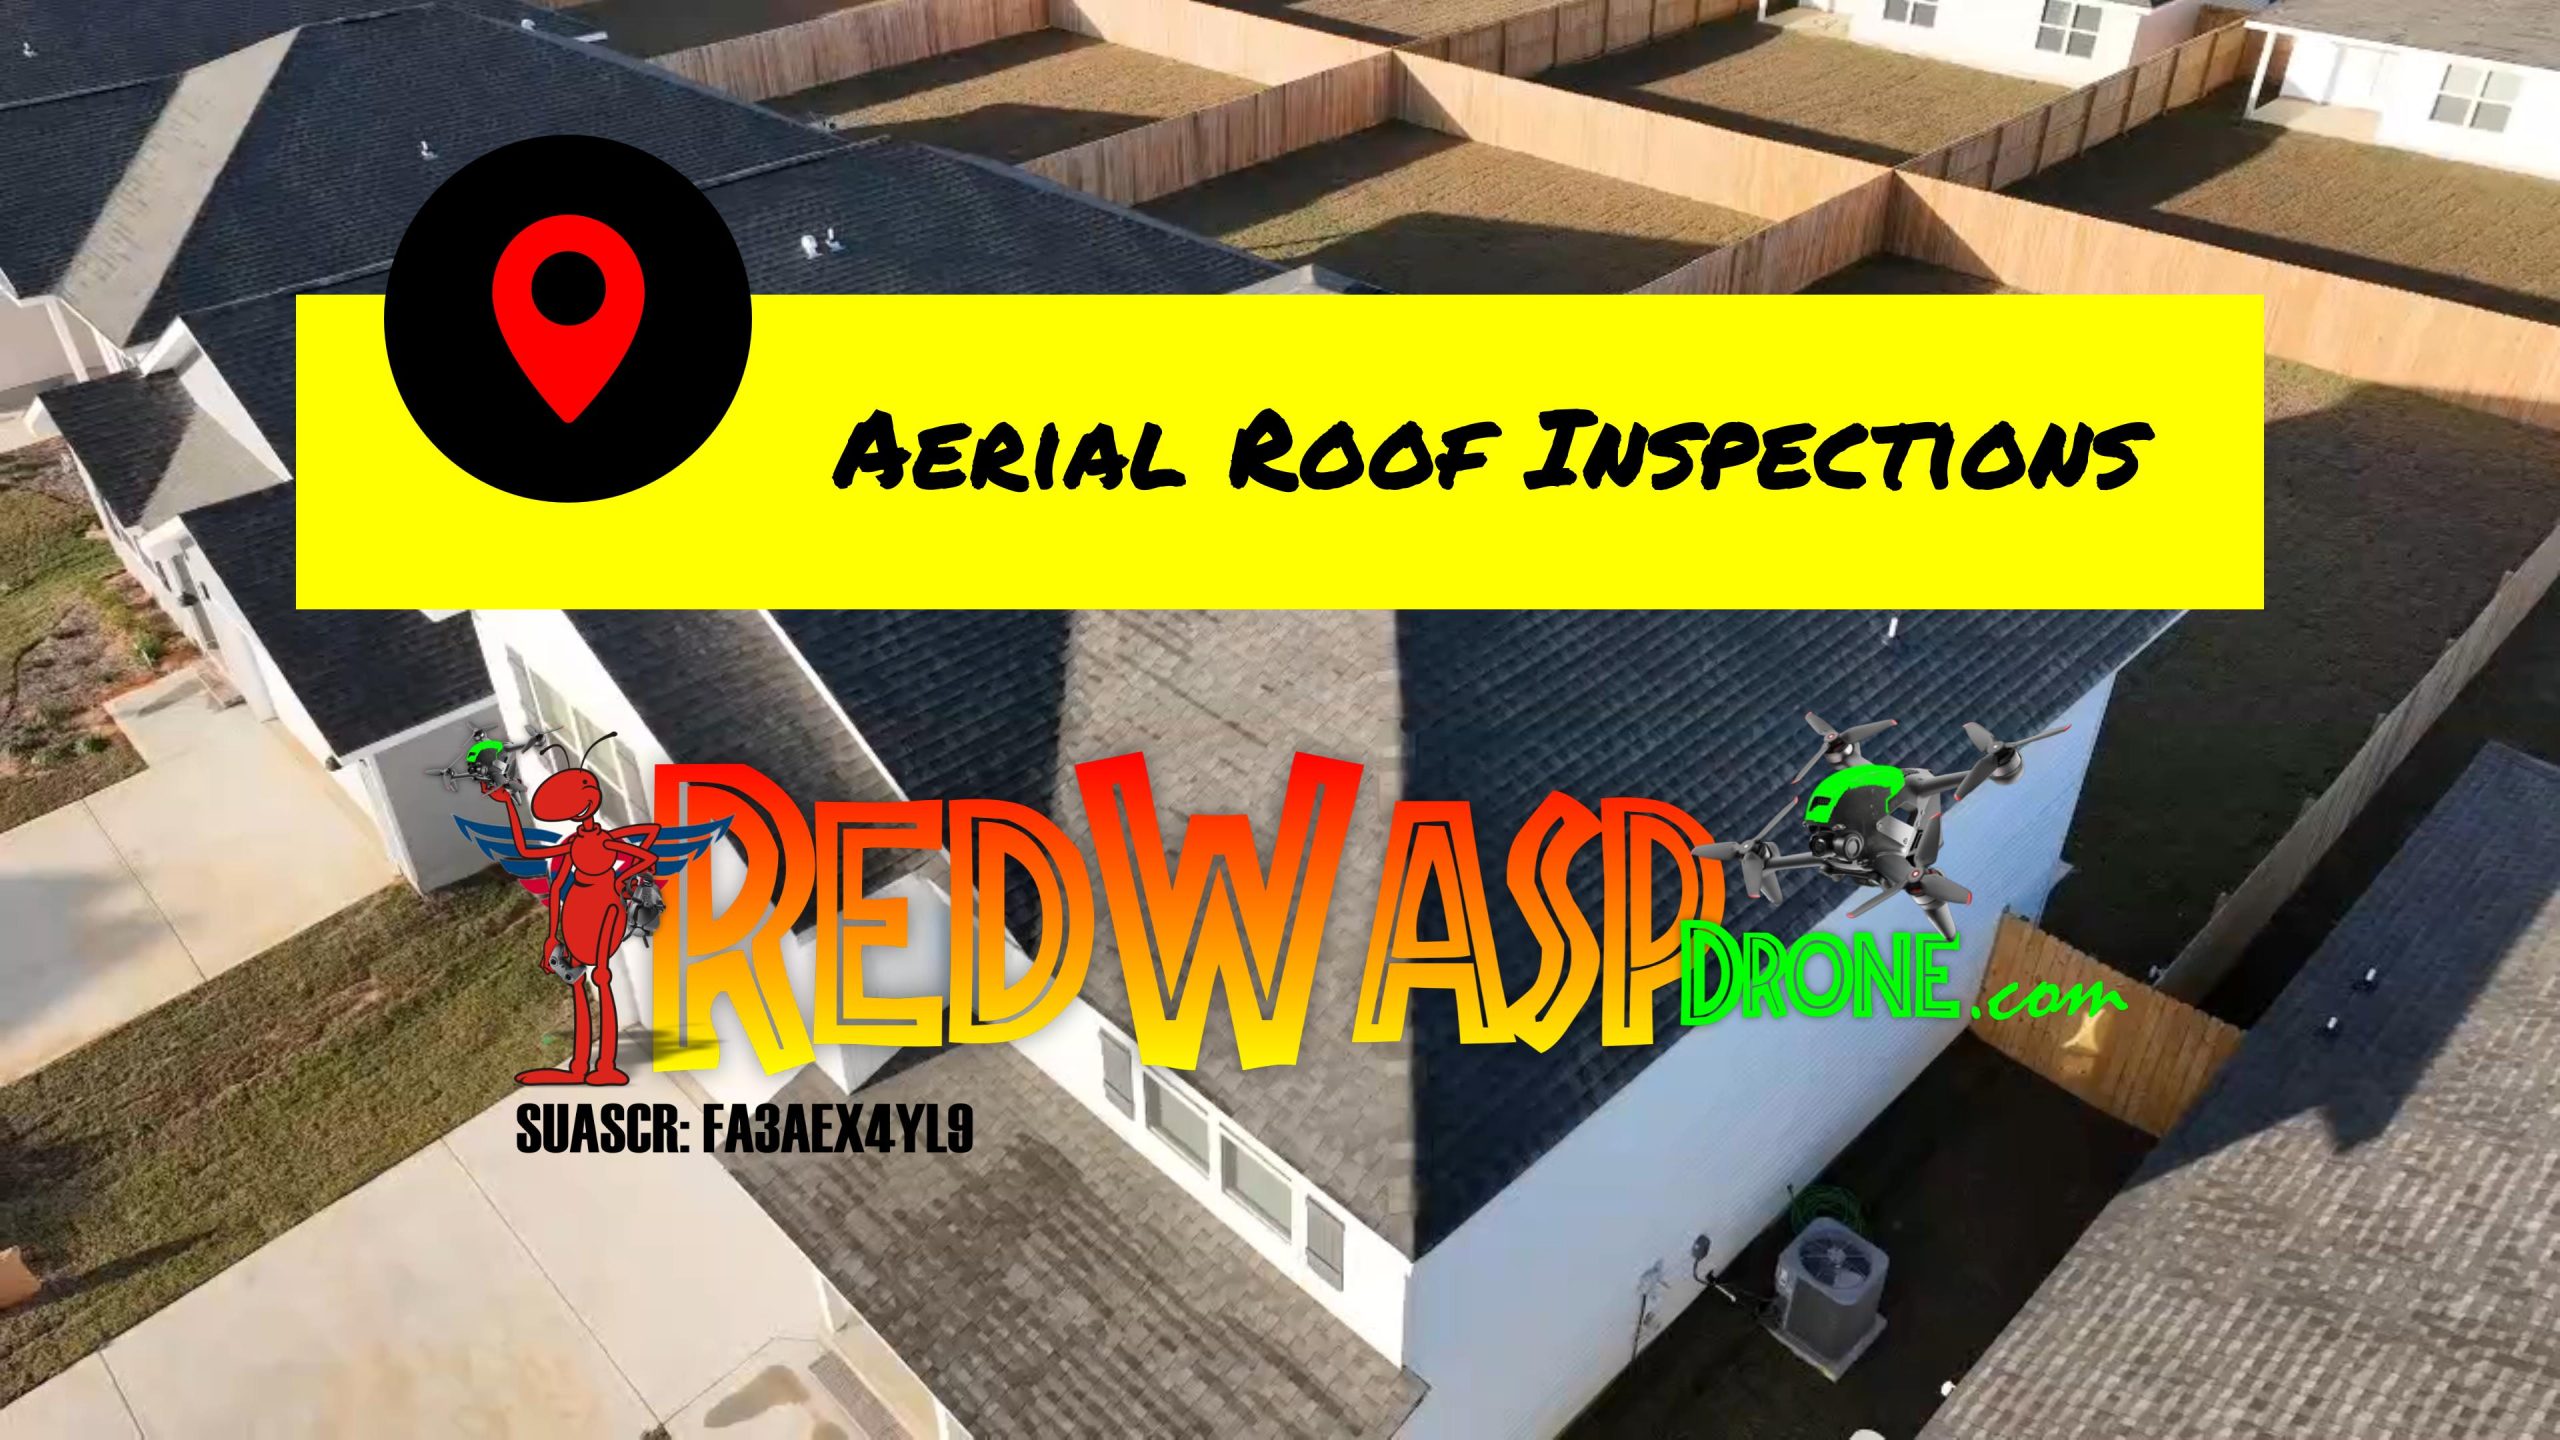 Aerial Roof Inspection, Drone for Roof Inspections, Pensacola Drone Services, Destin Drone Video, Roof Inspections, Red Wasp Drone, Drone Video Photo Service,